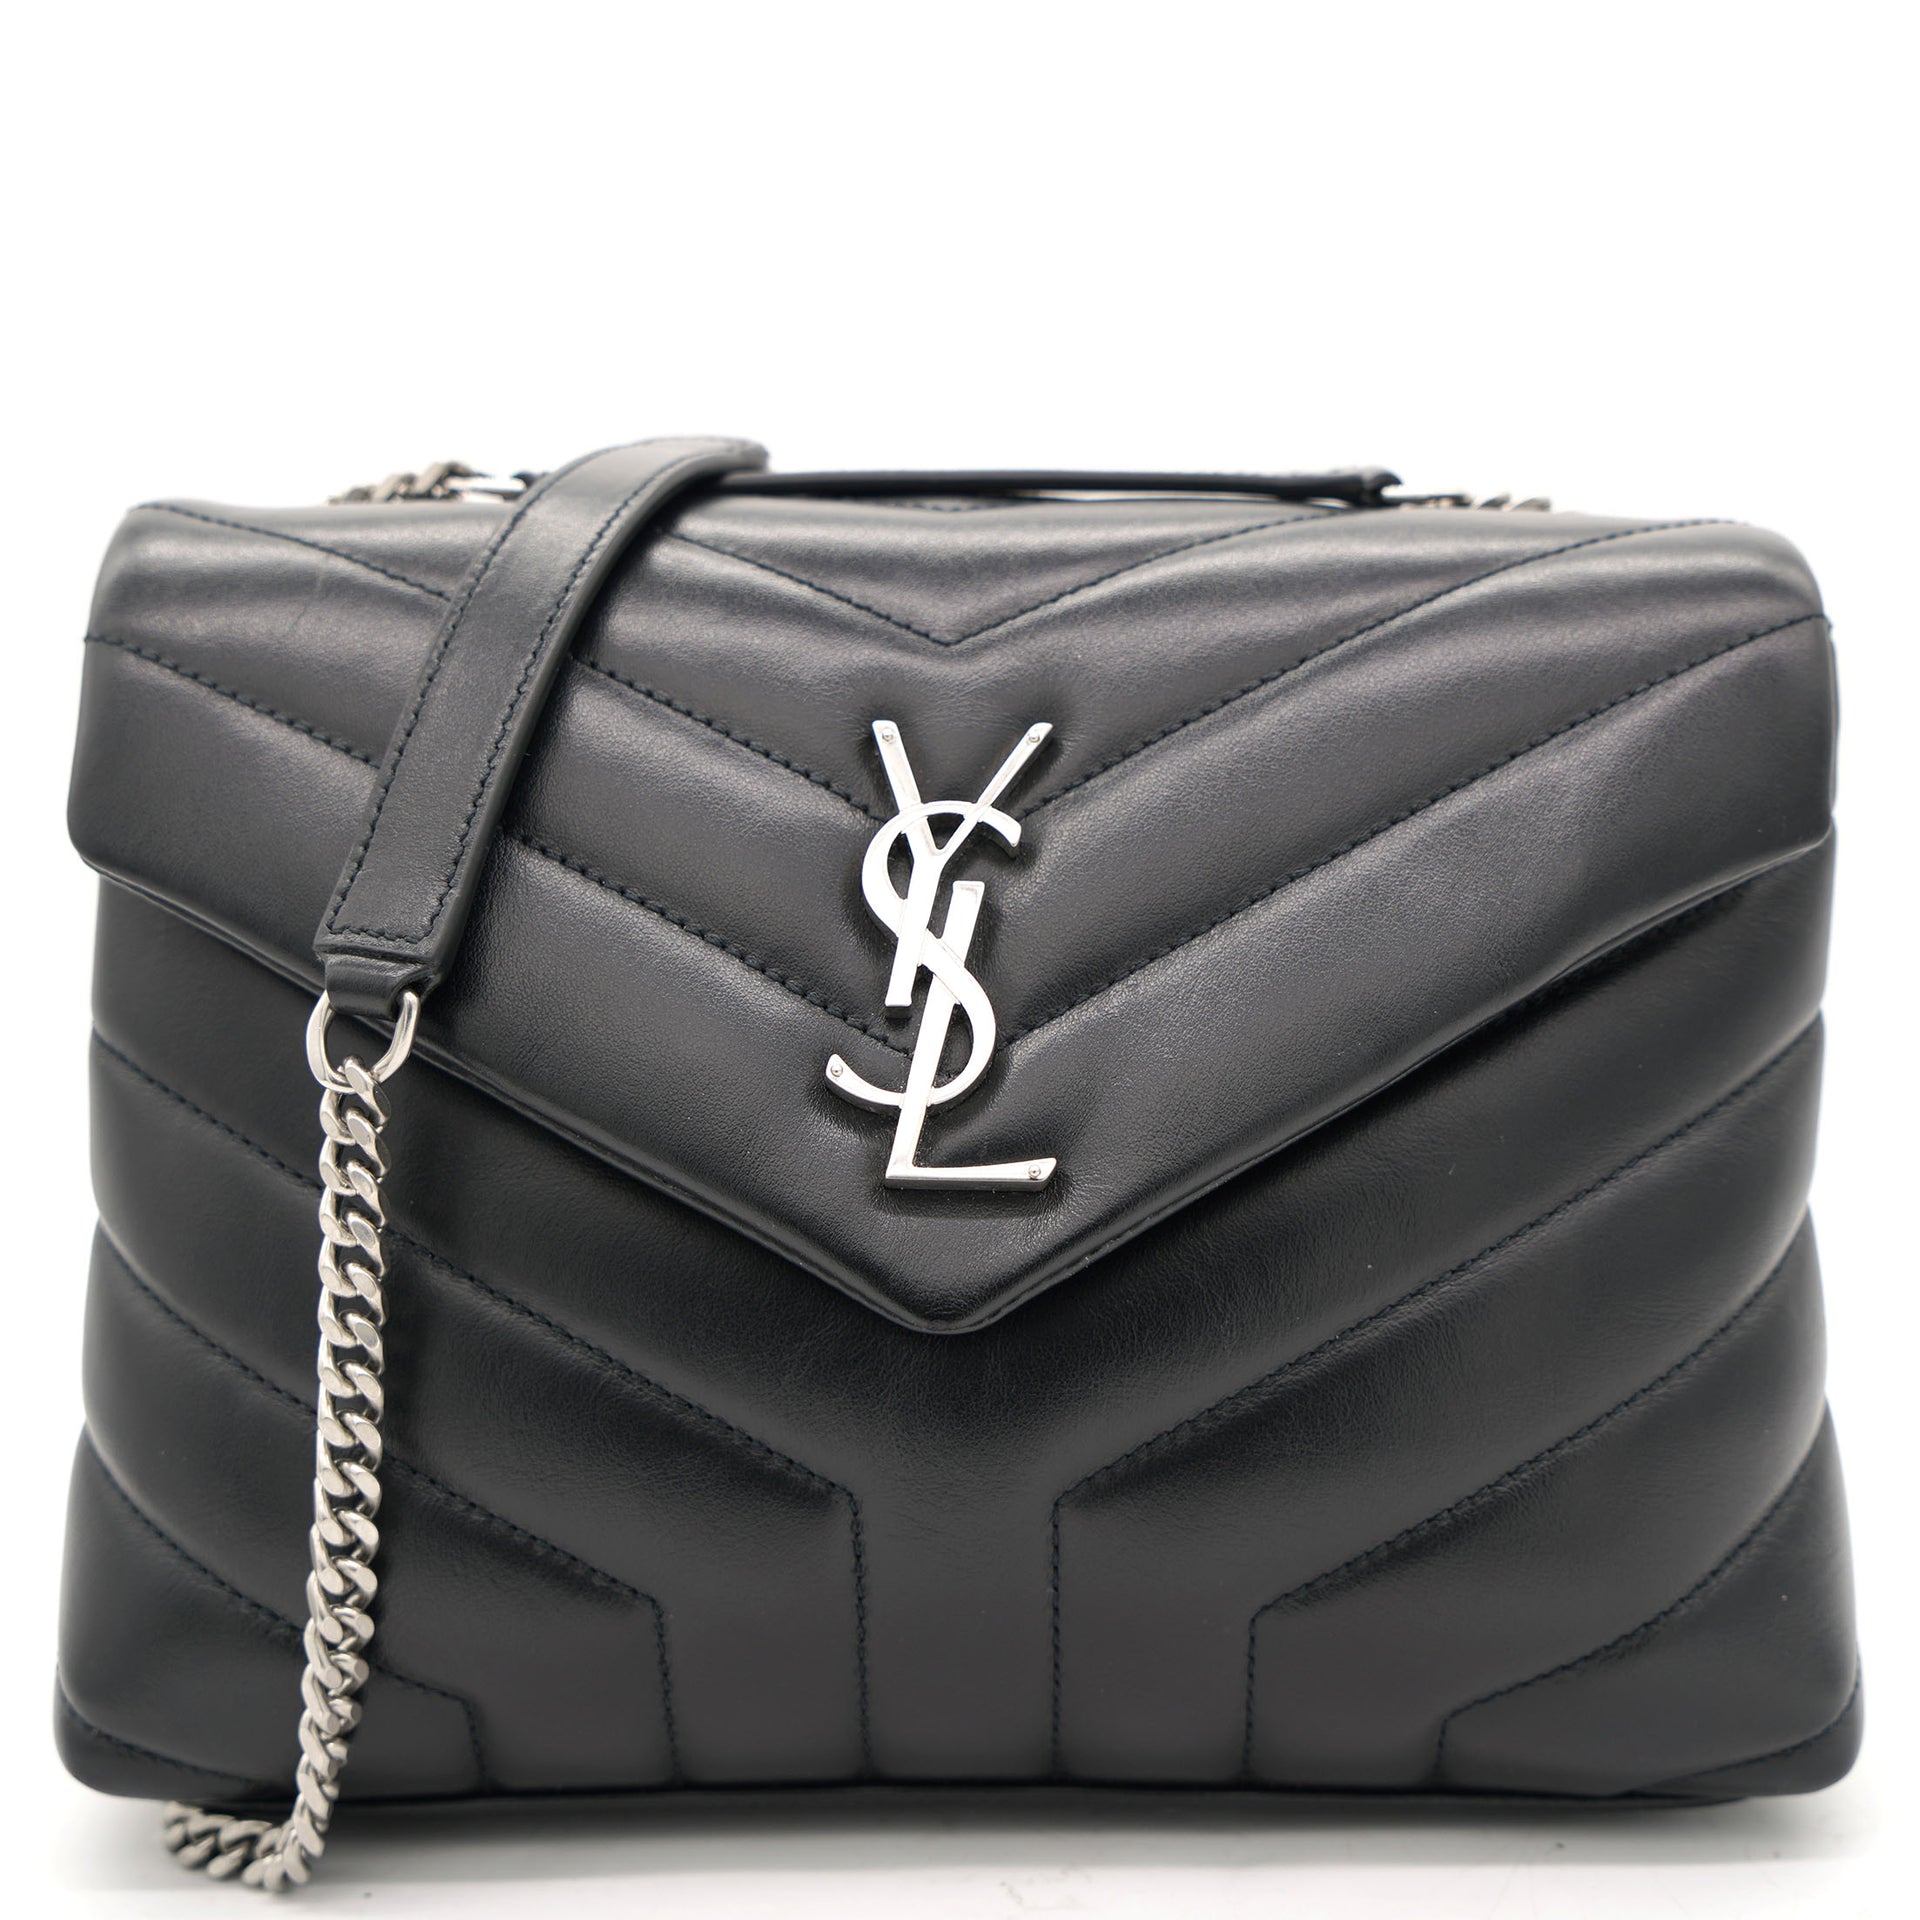 Authentic Saint Laurent YSL Bags, Shoes, and Accessories - The